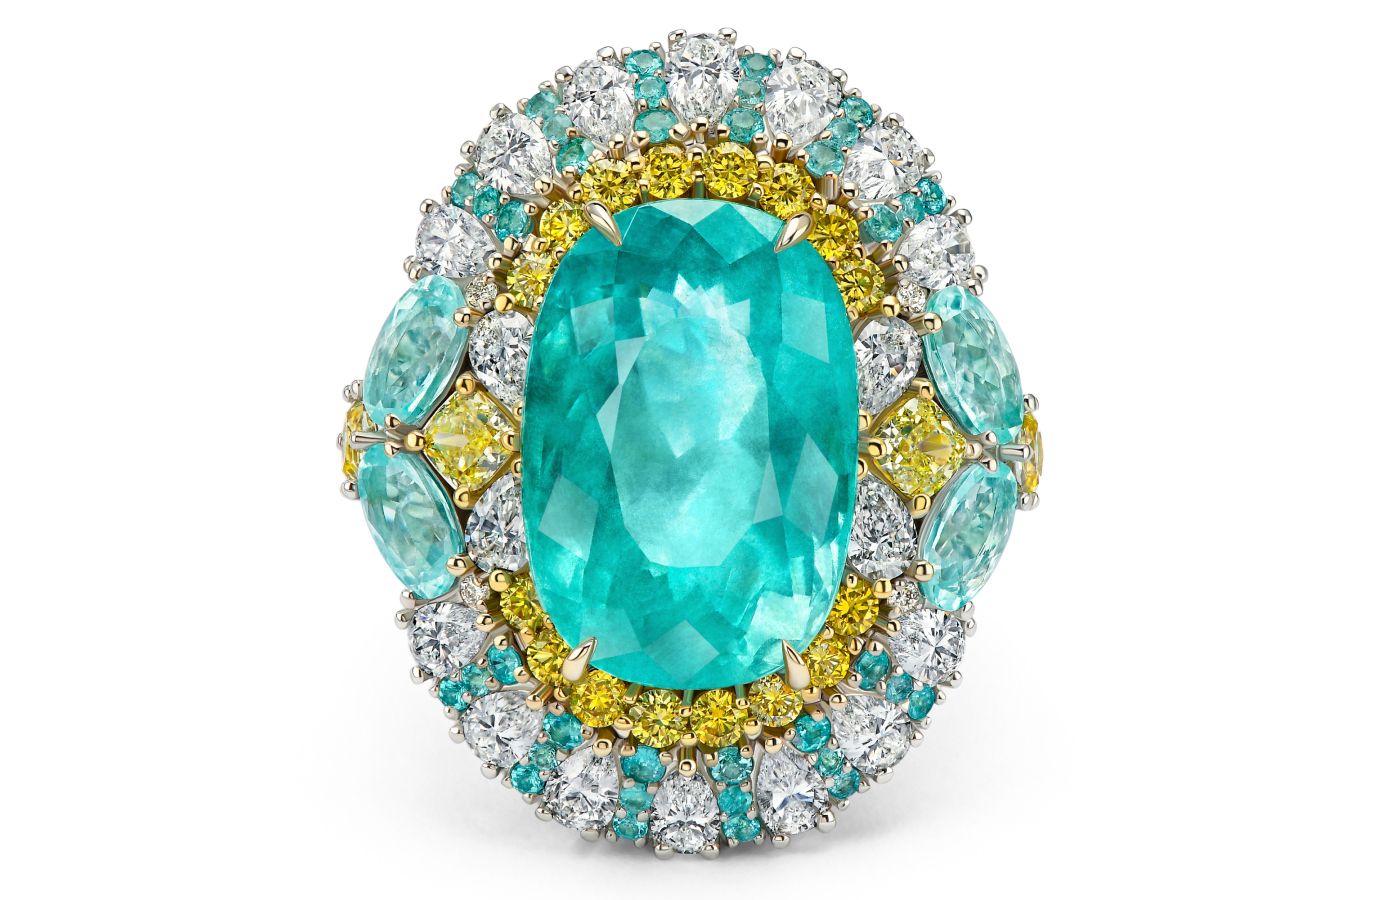 Parure Atelier High Jewellery ring in enamel, featuring a 12.94-ct Paraiba tourmaline, fancy yellow diamonds, Paraiba tourmalines and diamonds 